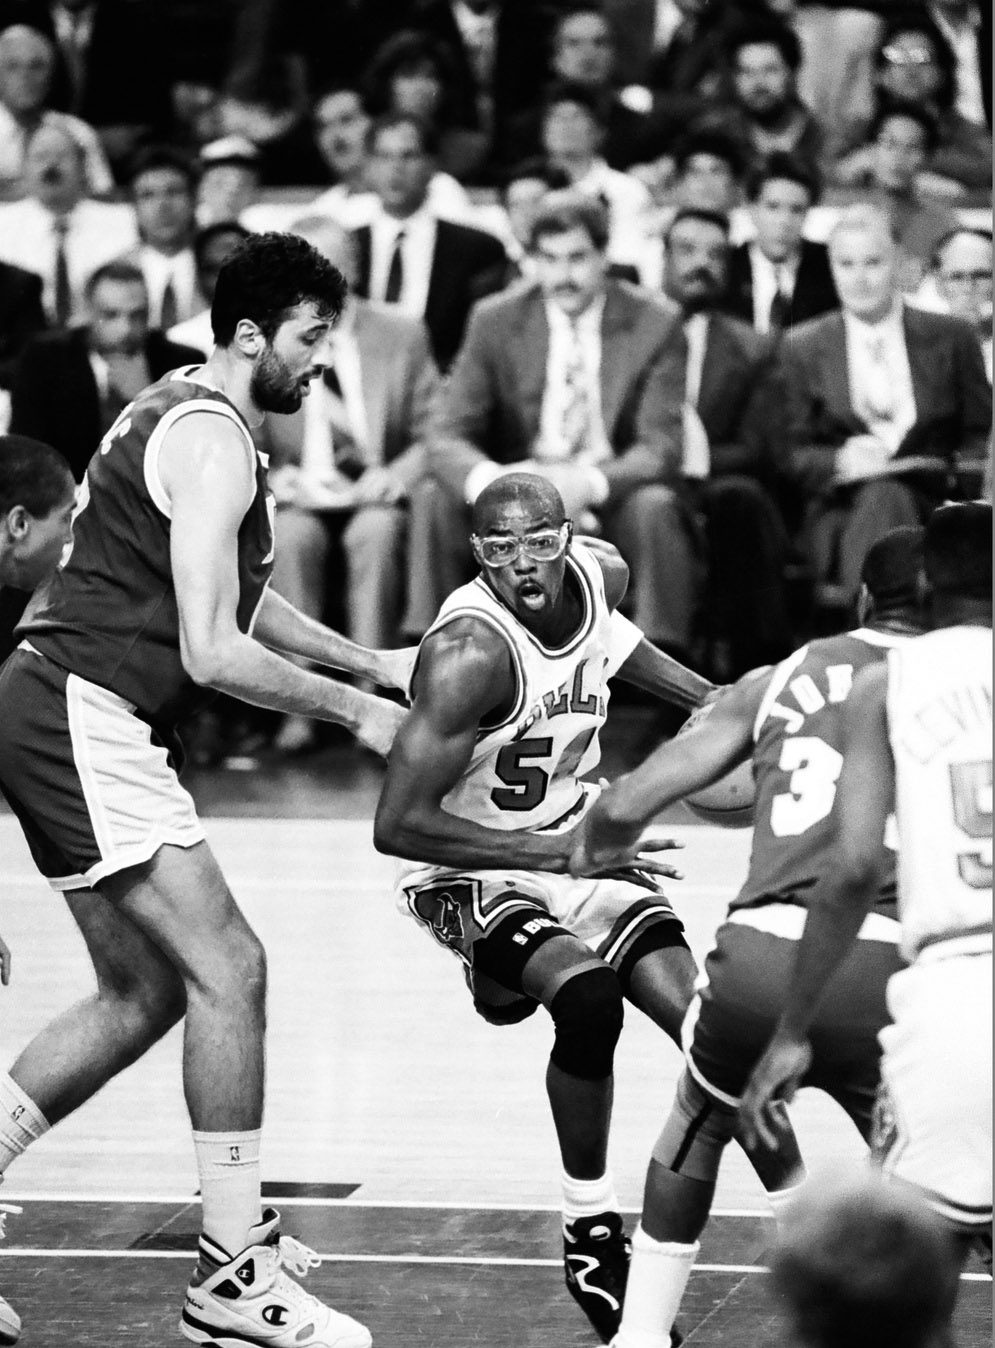 Black and white game photo. In the key, Horace Grant has control of the ball as he leans into defender Vlade Divac, who is much taller than Grant.